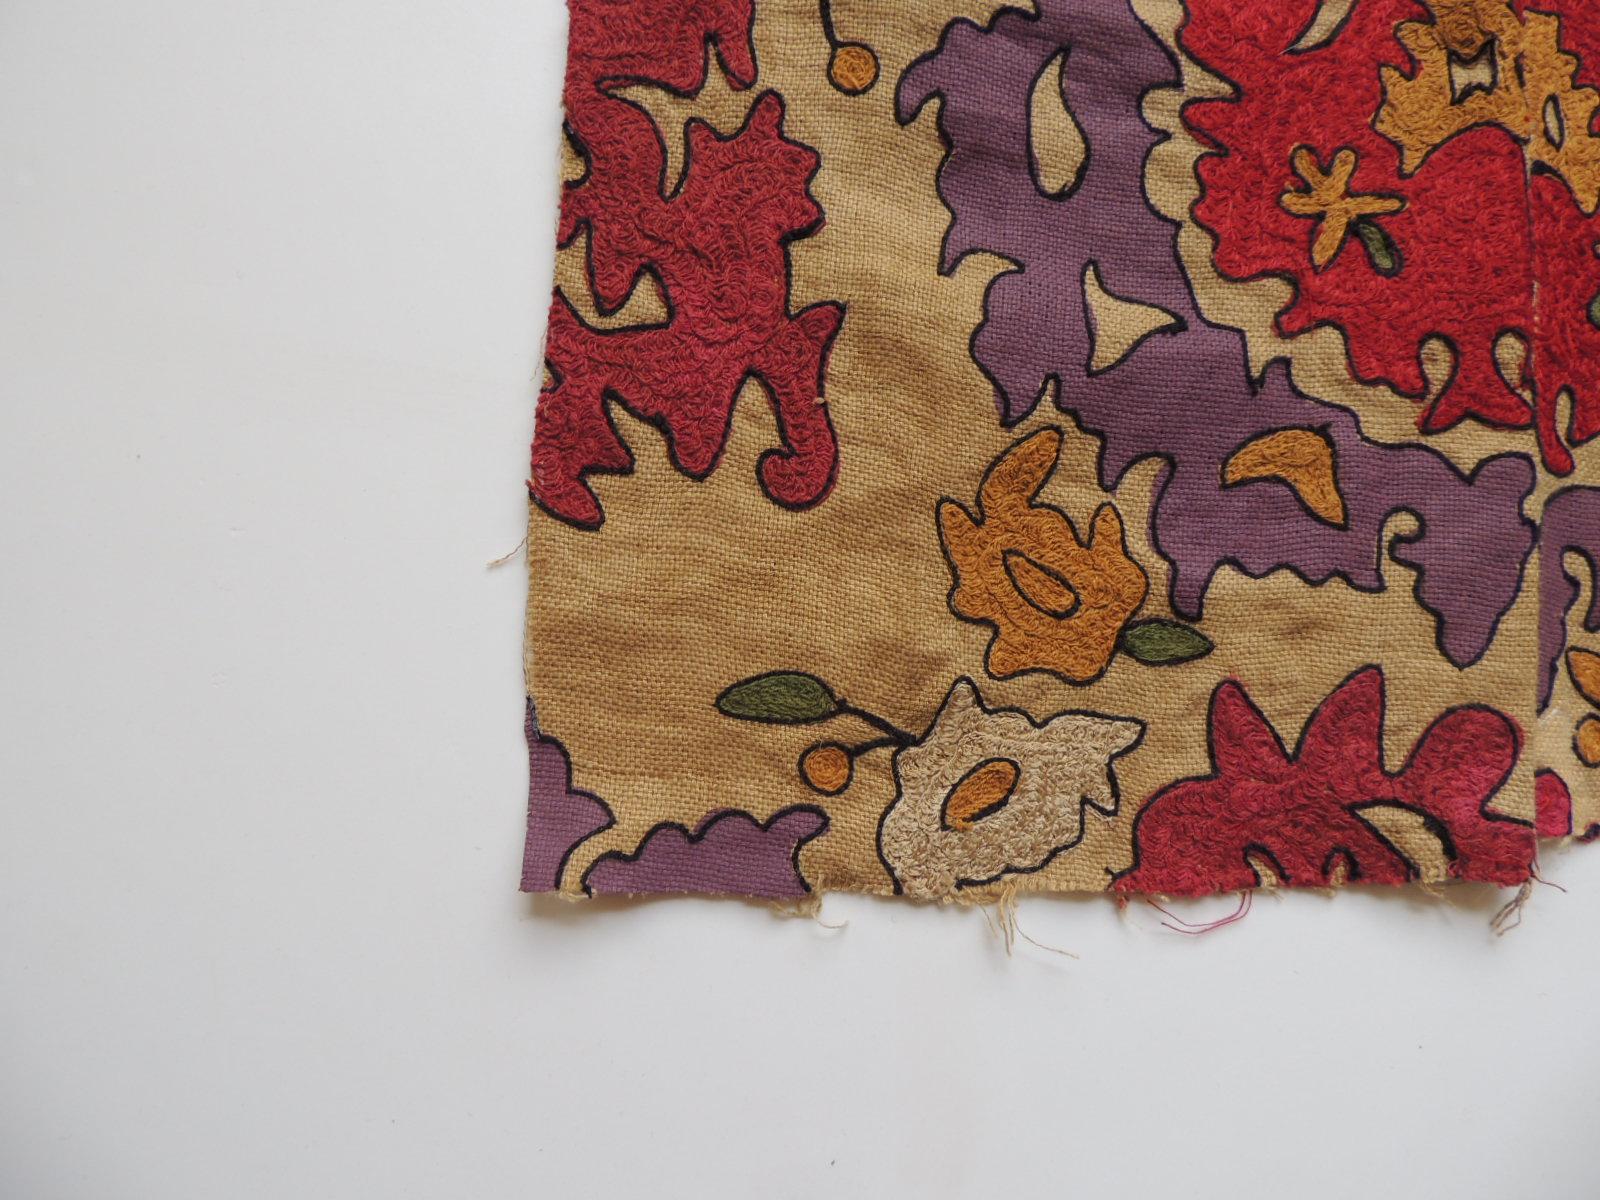 Red and purple embroidery Suzani textile fragment, floral pattern.
Ideal for a pillow or upholstery.
Size: 14